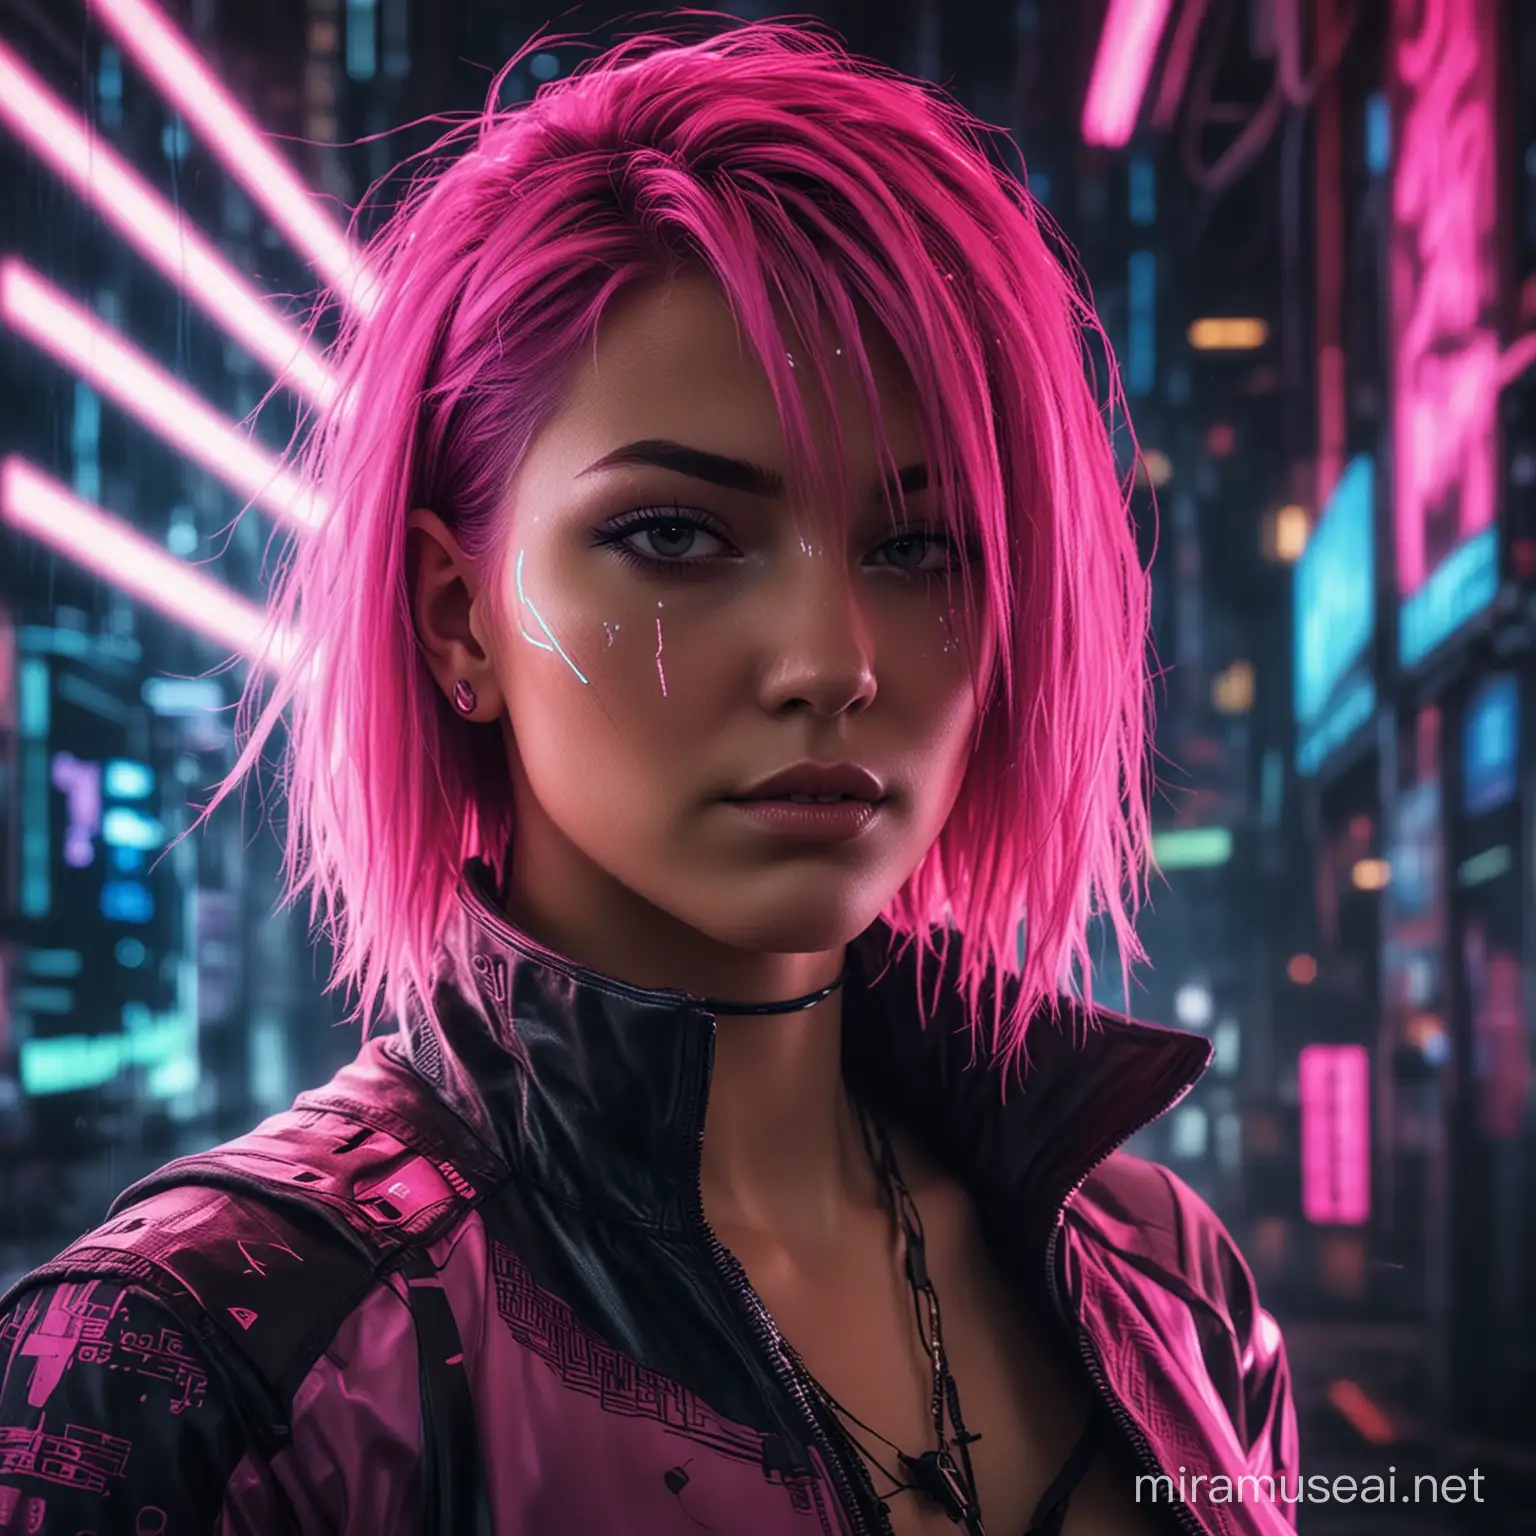 Glamour shot, A cyberpunk hacker with neon-streaked hair, her face partially obscured by digital data streams and shadows, illuminated in vibrant pink tones. She is surrounded by a high-tech atmosphere that adds to the mystery of her covert activities
